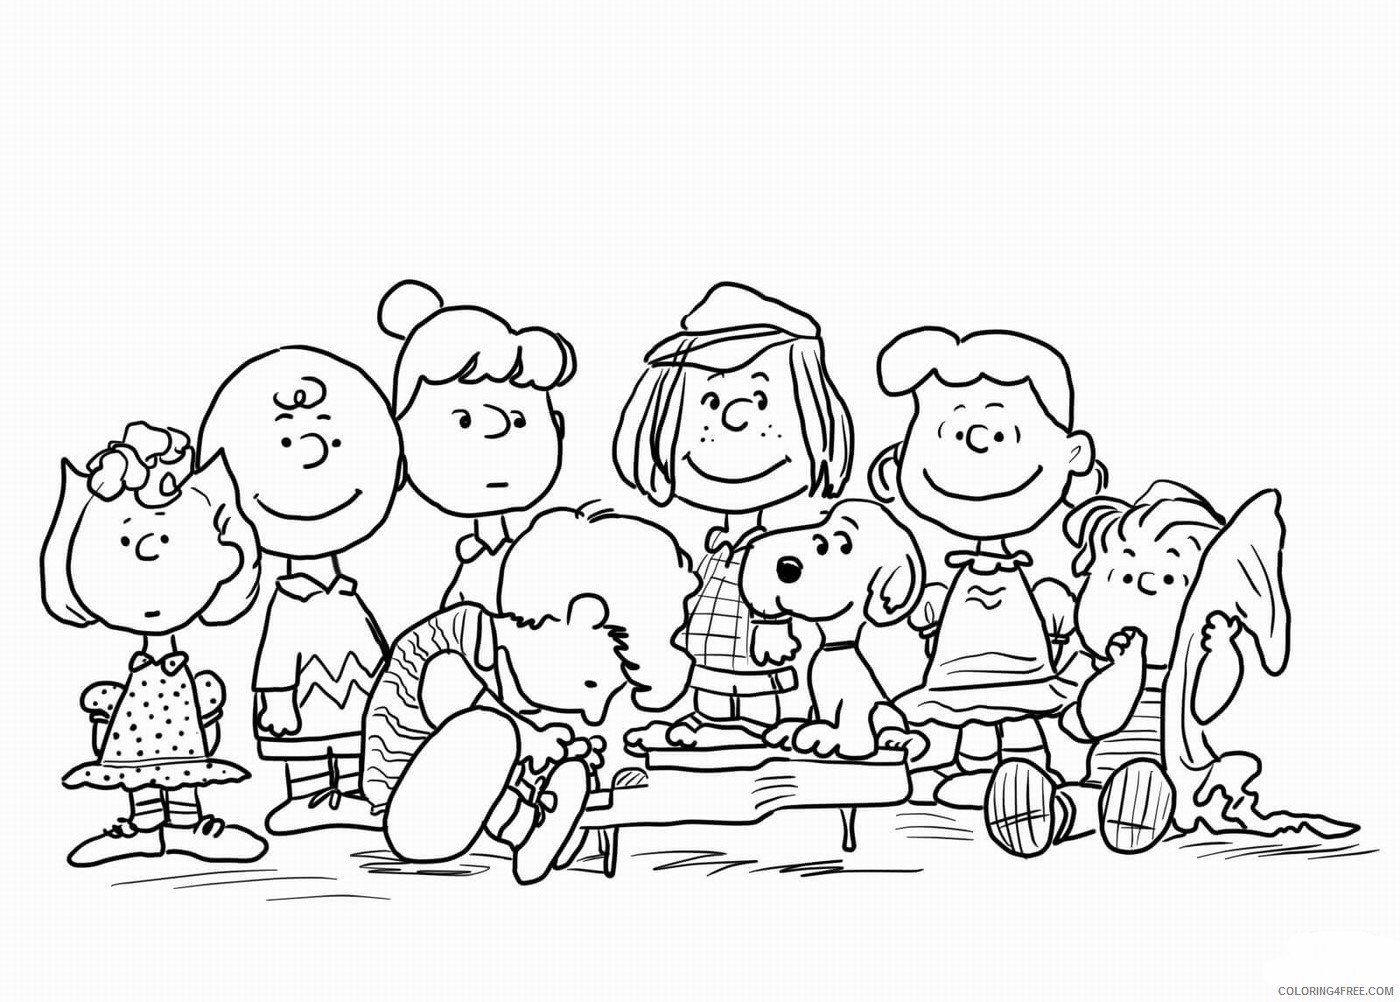 Peanuts Coloring Pages Cartoons peanut movie_7 Printable 2020 4804 Coloring4free